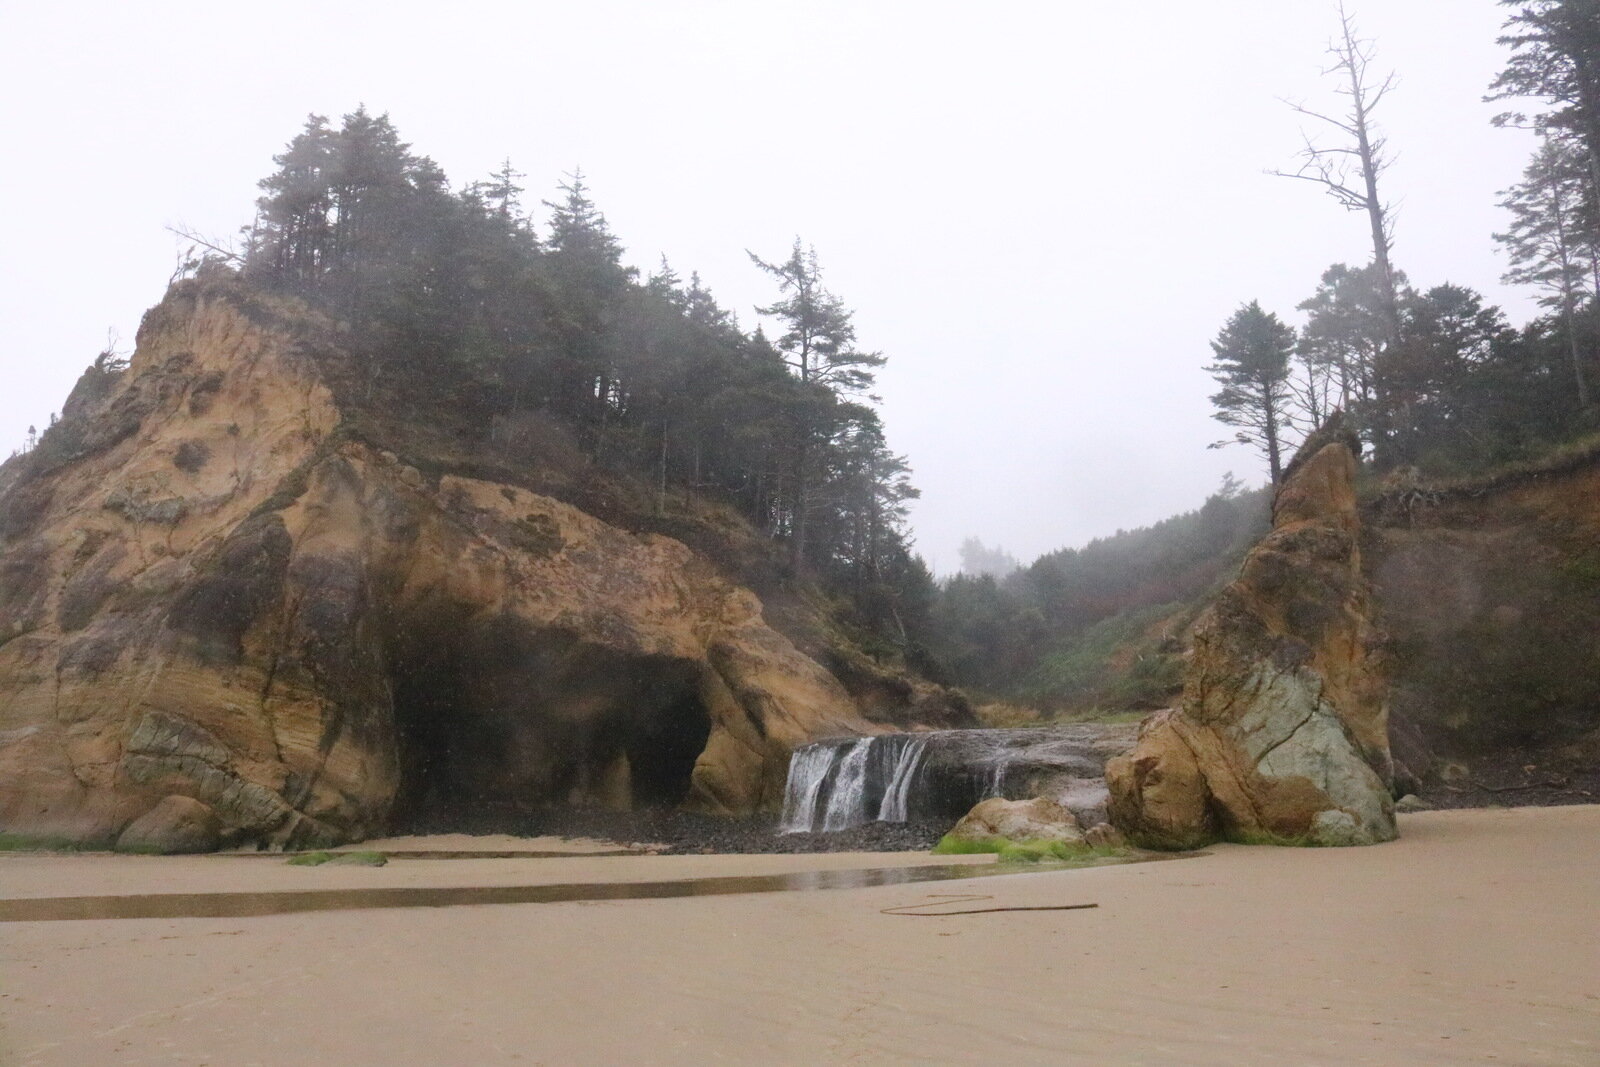 A beach with a small waterfall and cave in the cliffs